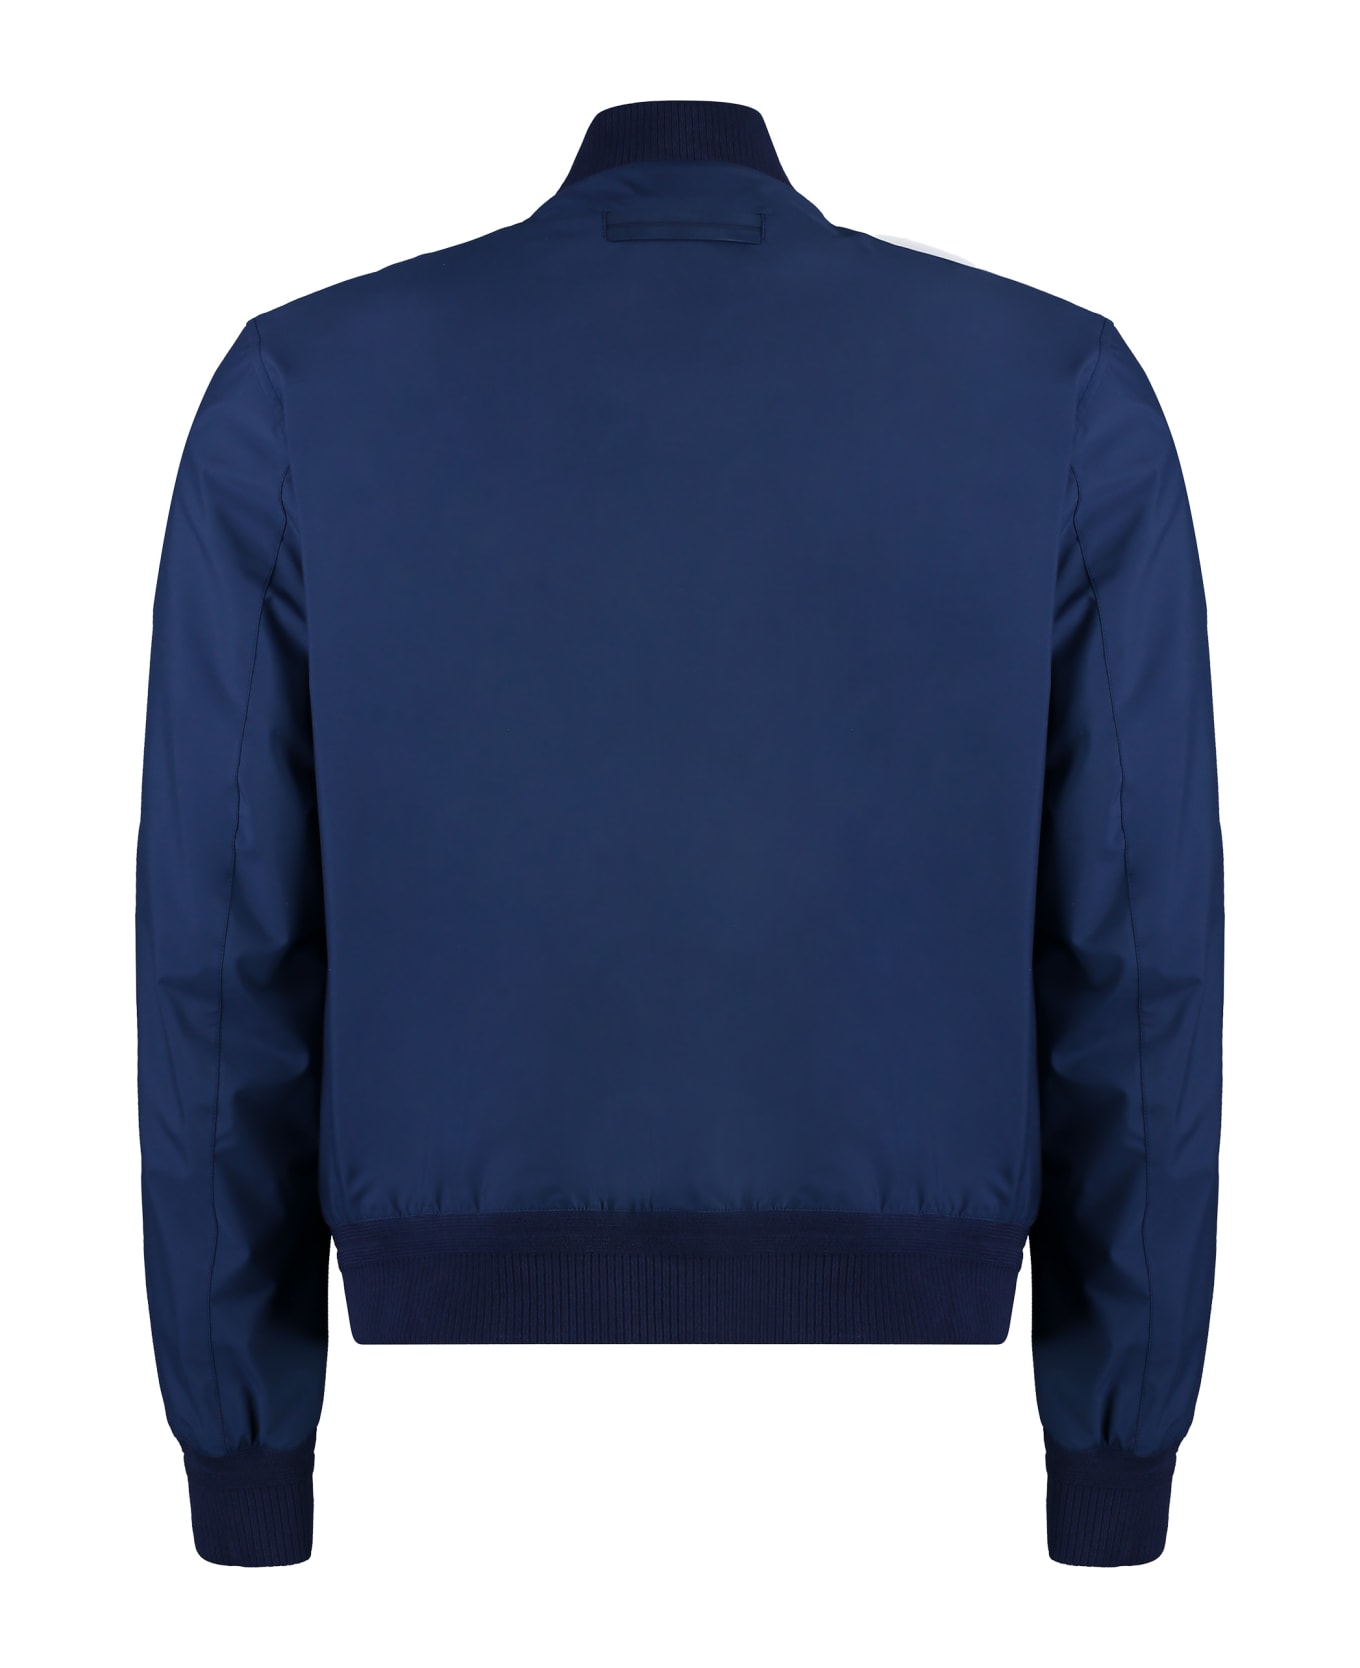 Zegna Bomber Jacket In Technical Fabric - blue